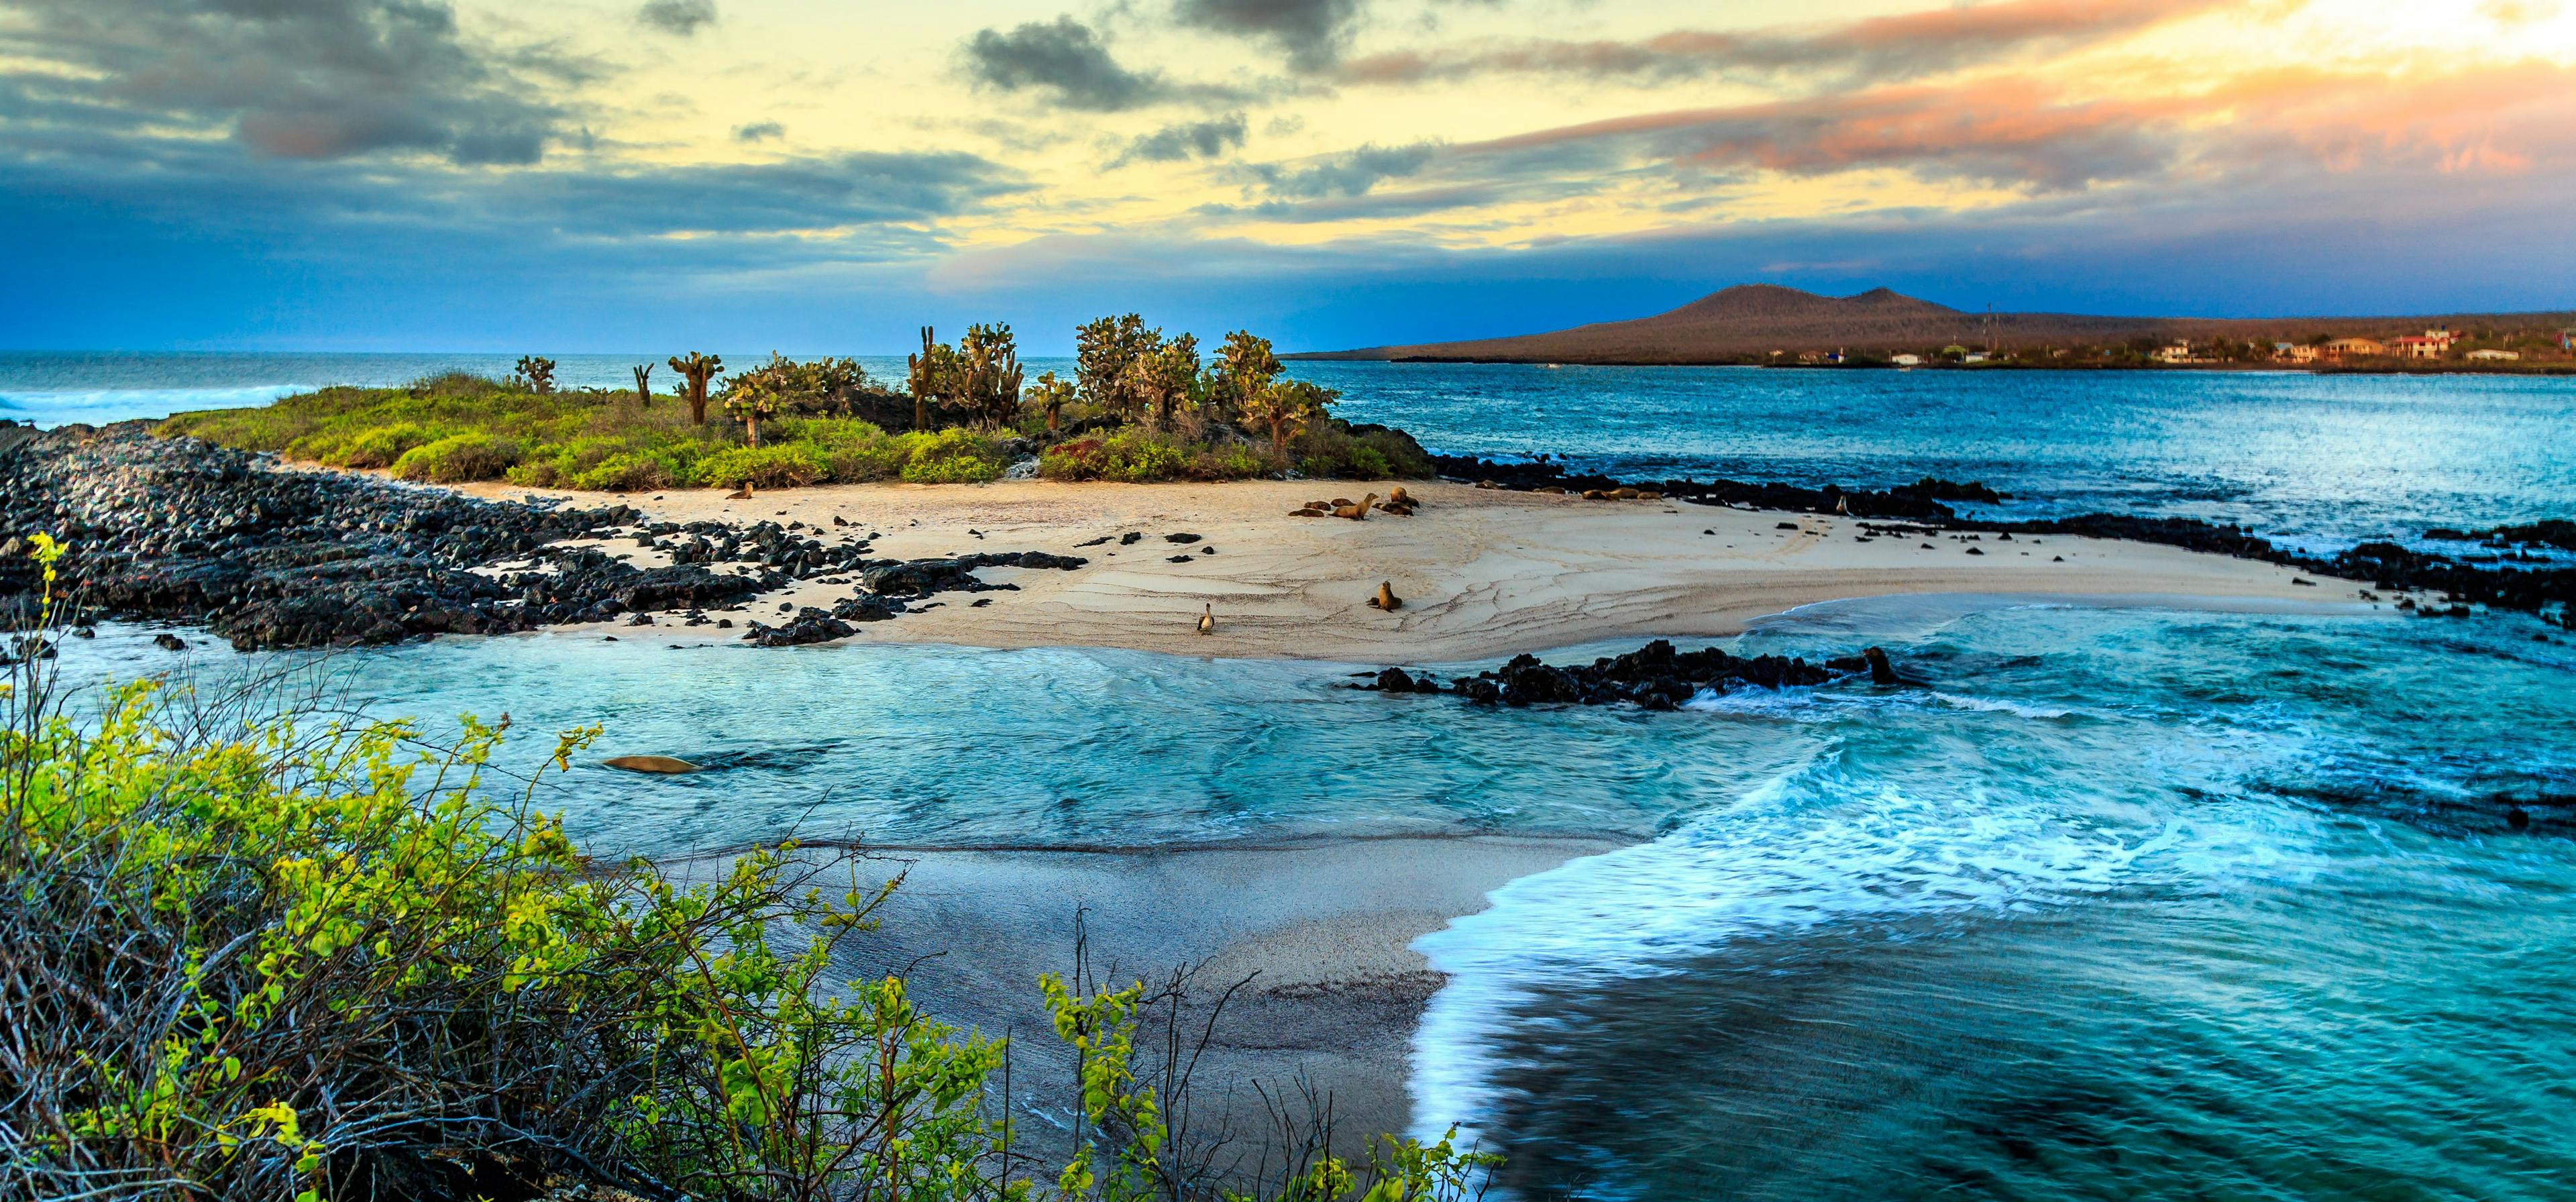 The mystique of the Galapagos Islands